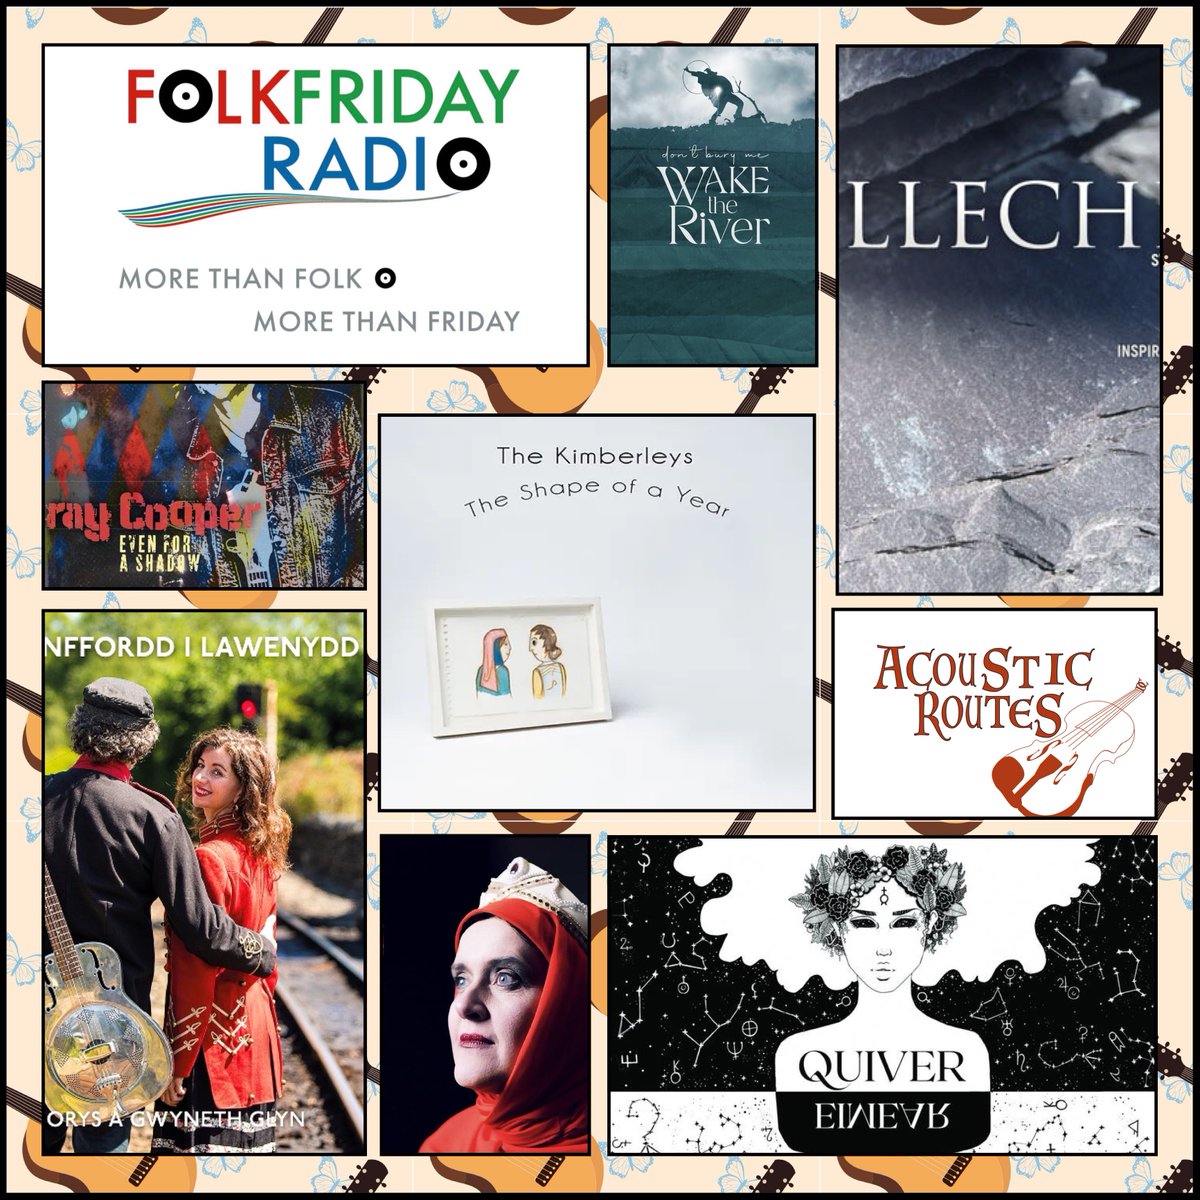 Coming up on @AcousticRoutes show 492, the featured album from @the_kimberleys & music from @twmtrefan a @GwynethGlyn @waketheriver @RaycooperRay @FoxbridgeMusic @StateofUndress @DariaKulesh and @johnacalun Tune in to @folkfridayradio 12pm 🏴󠁧󠁢󠁷󠁬󠁳󠁿🇬🇧time today folkfridayradio.com